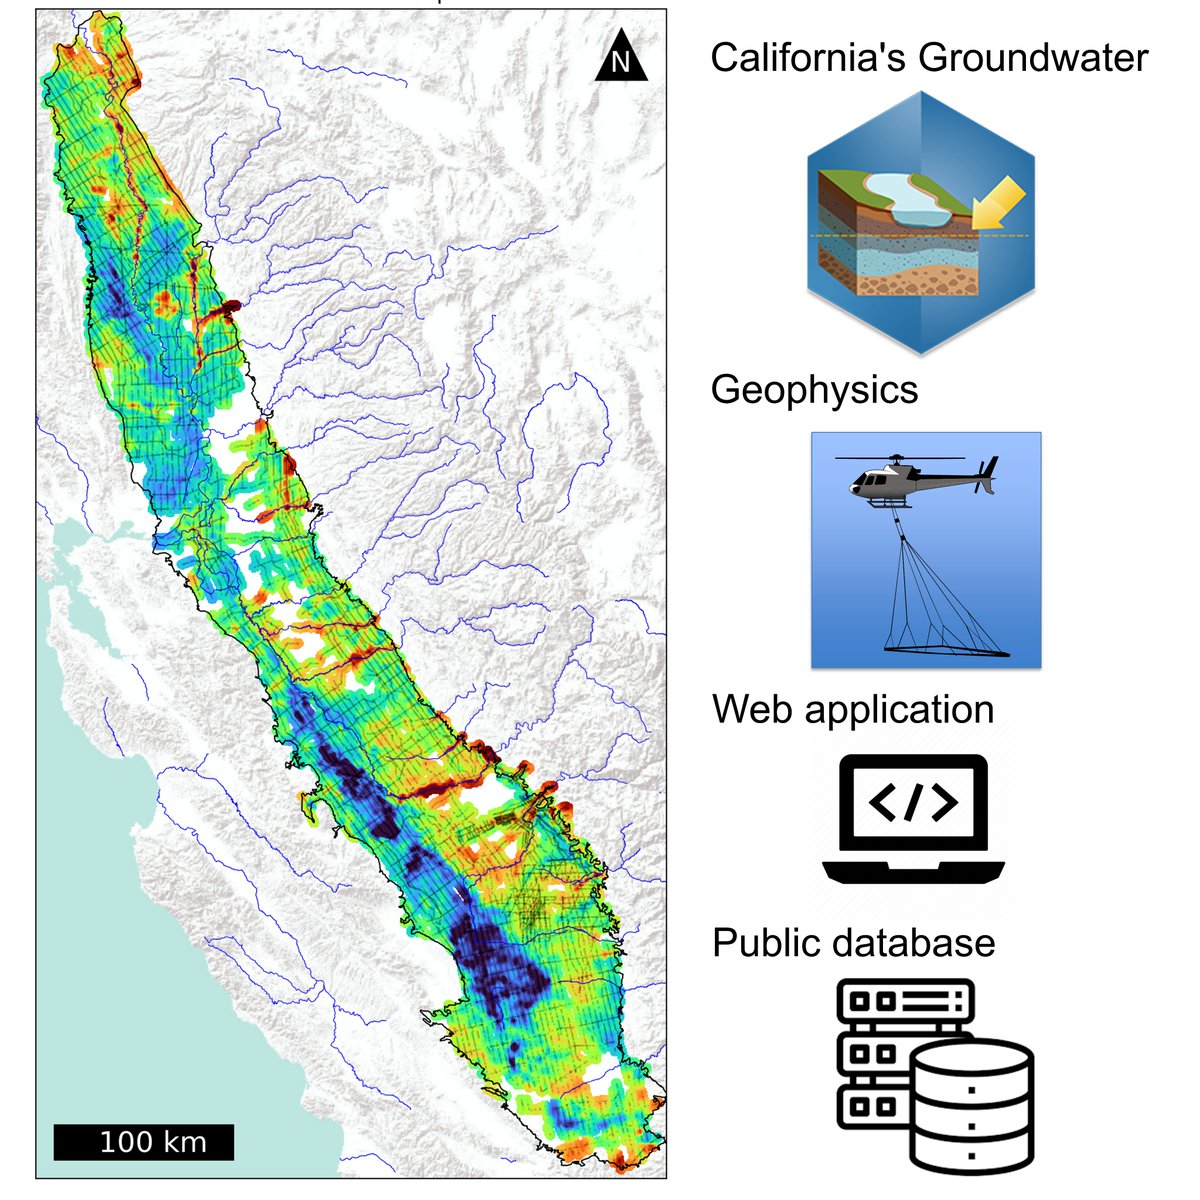 Excited to share our progress in groundwater recharge! On Feb 15 at 11am PT, I'll present our web-app using public geophysical data to speed up recharge in CA #LoveDataWeek #GroundwaterRecharge #DataScience Join me: events.stanford.edu/event/accelera…